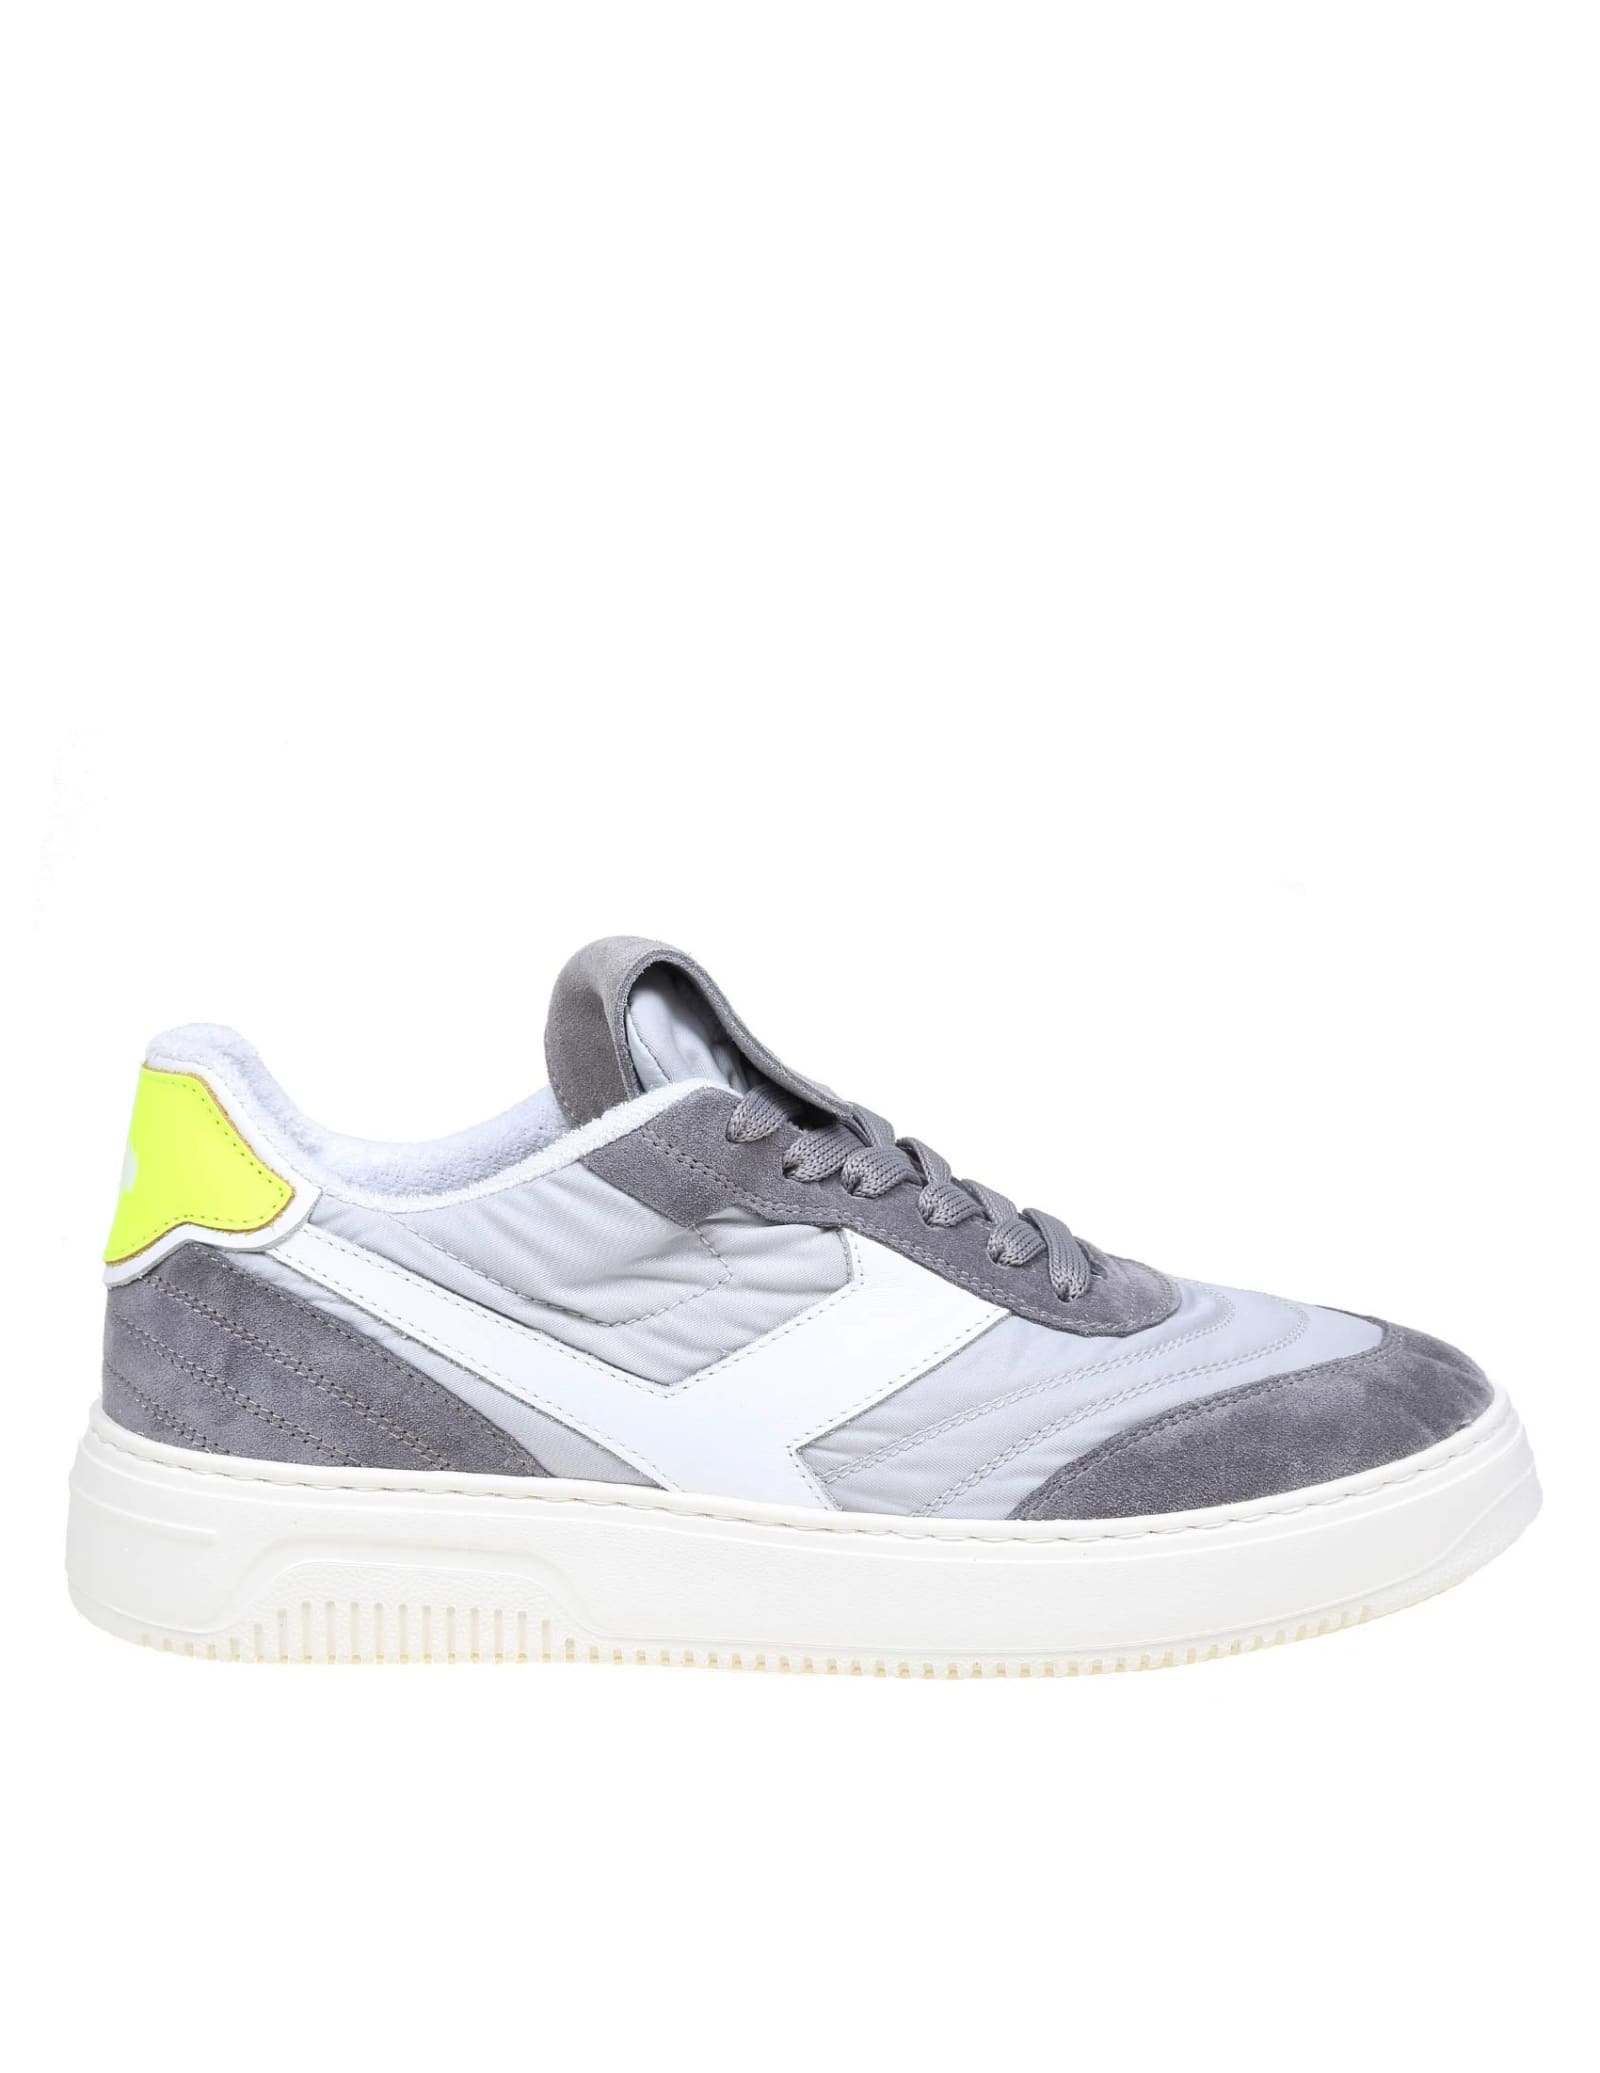 Pantofola D'Oro Sneaker In Suede And Gray Fabric